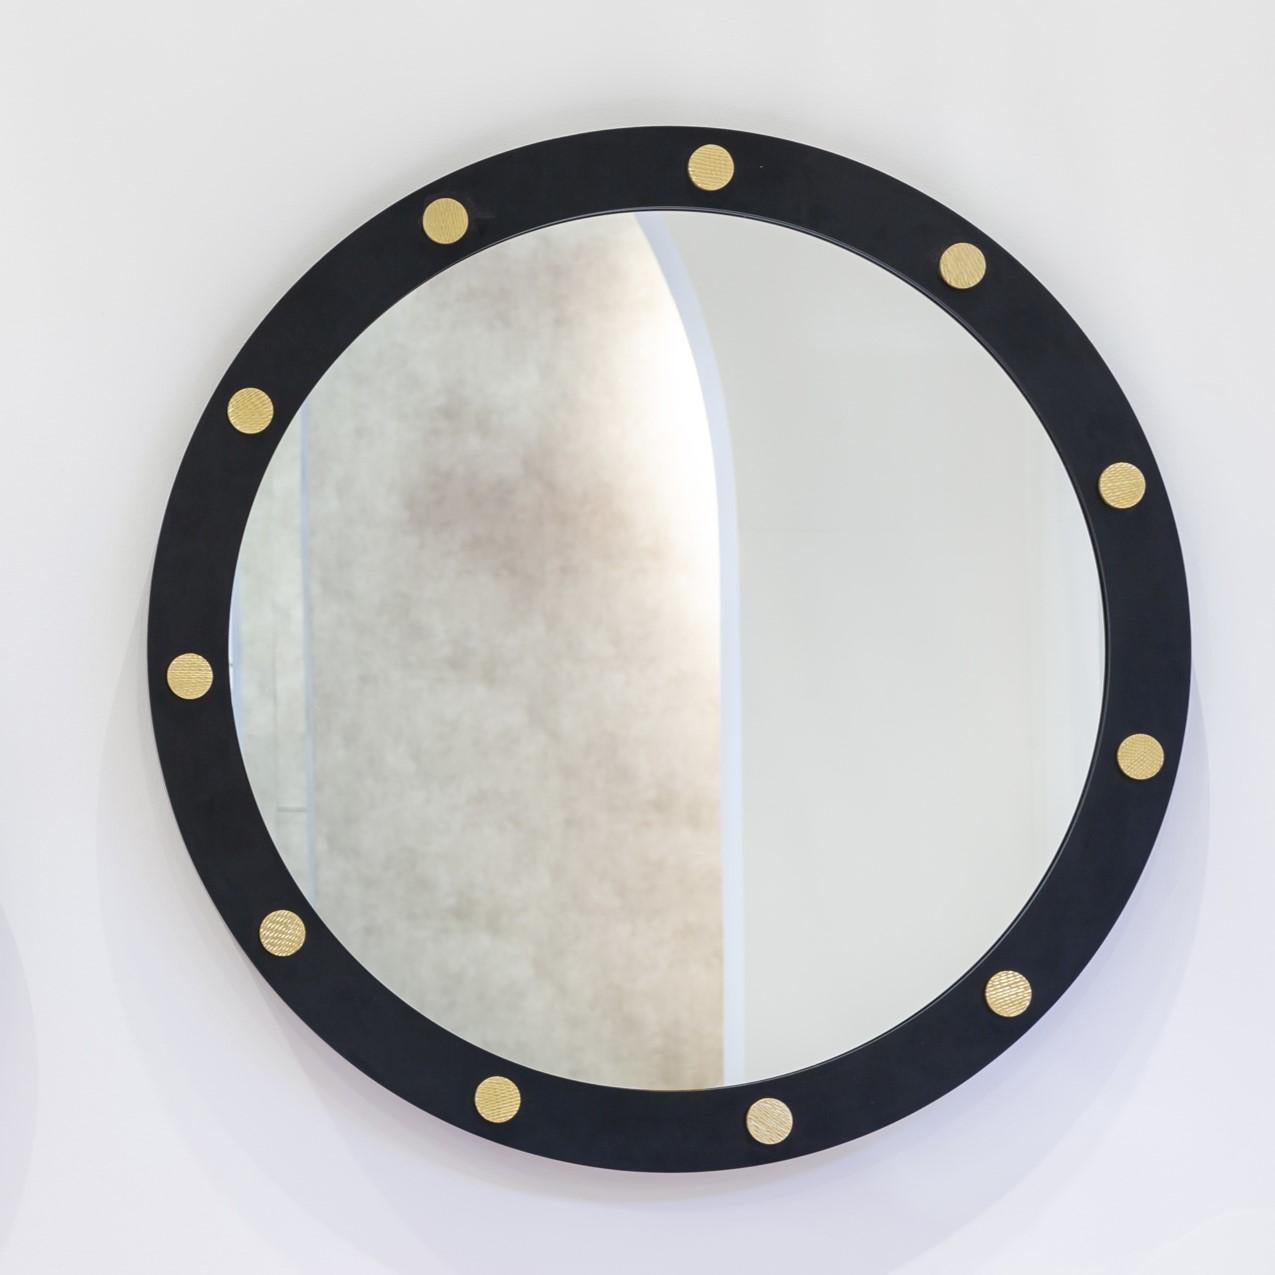 Cluster Round 80 Mirror by DUISTT 
Dimensions: W 80 x D 4 x H 80 cm
Materials: Black Iron Structure with Brushed Brass Details

Cluster round mirror features a mate black lacquered iron structure with carved brass details. Becoming a fundamental